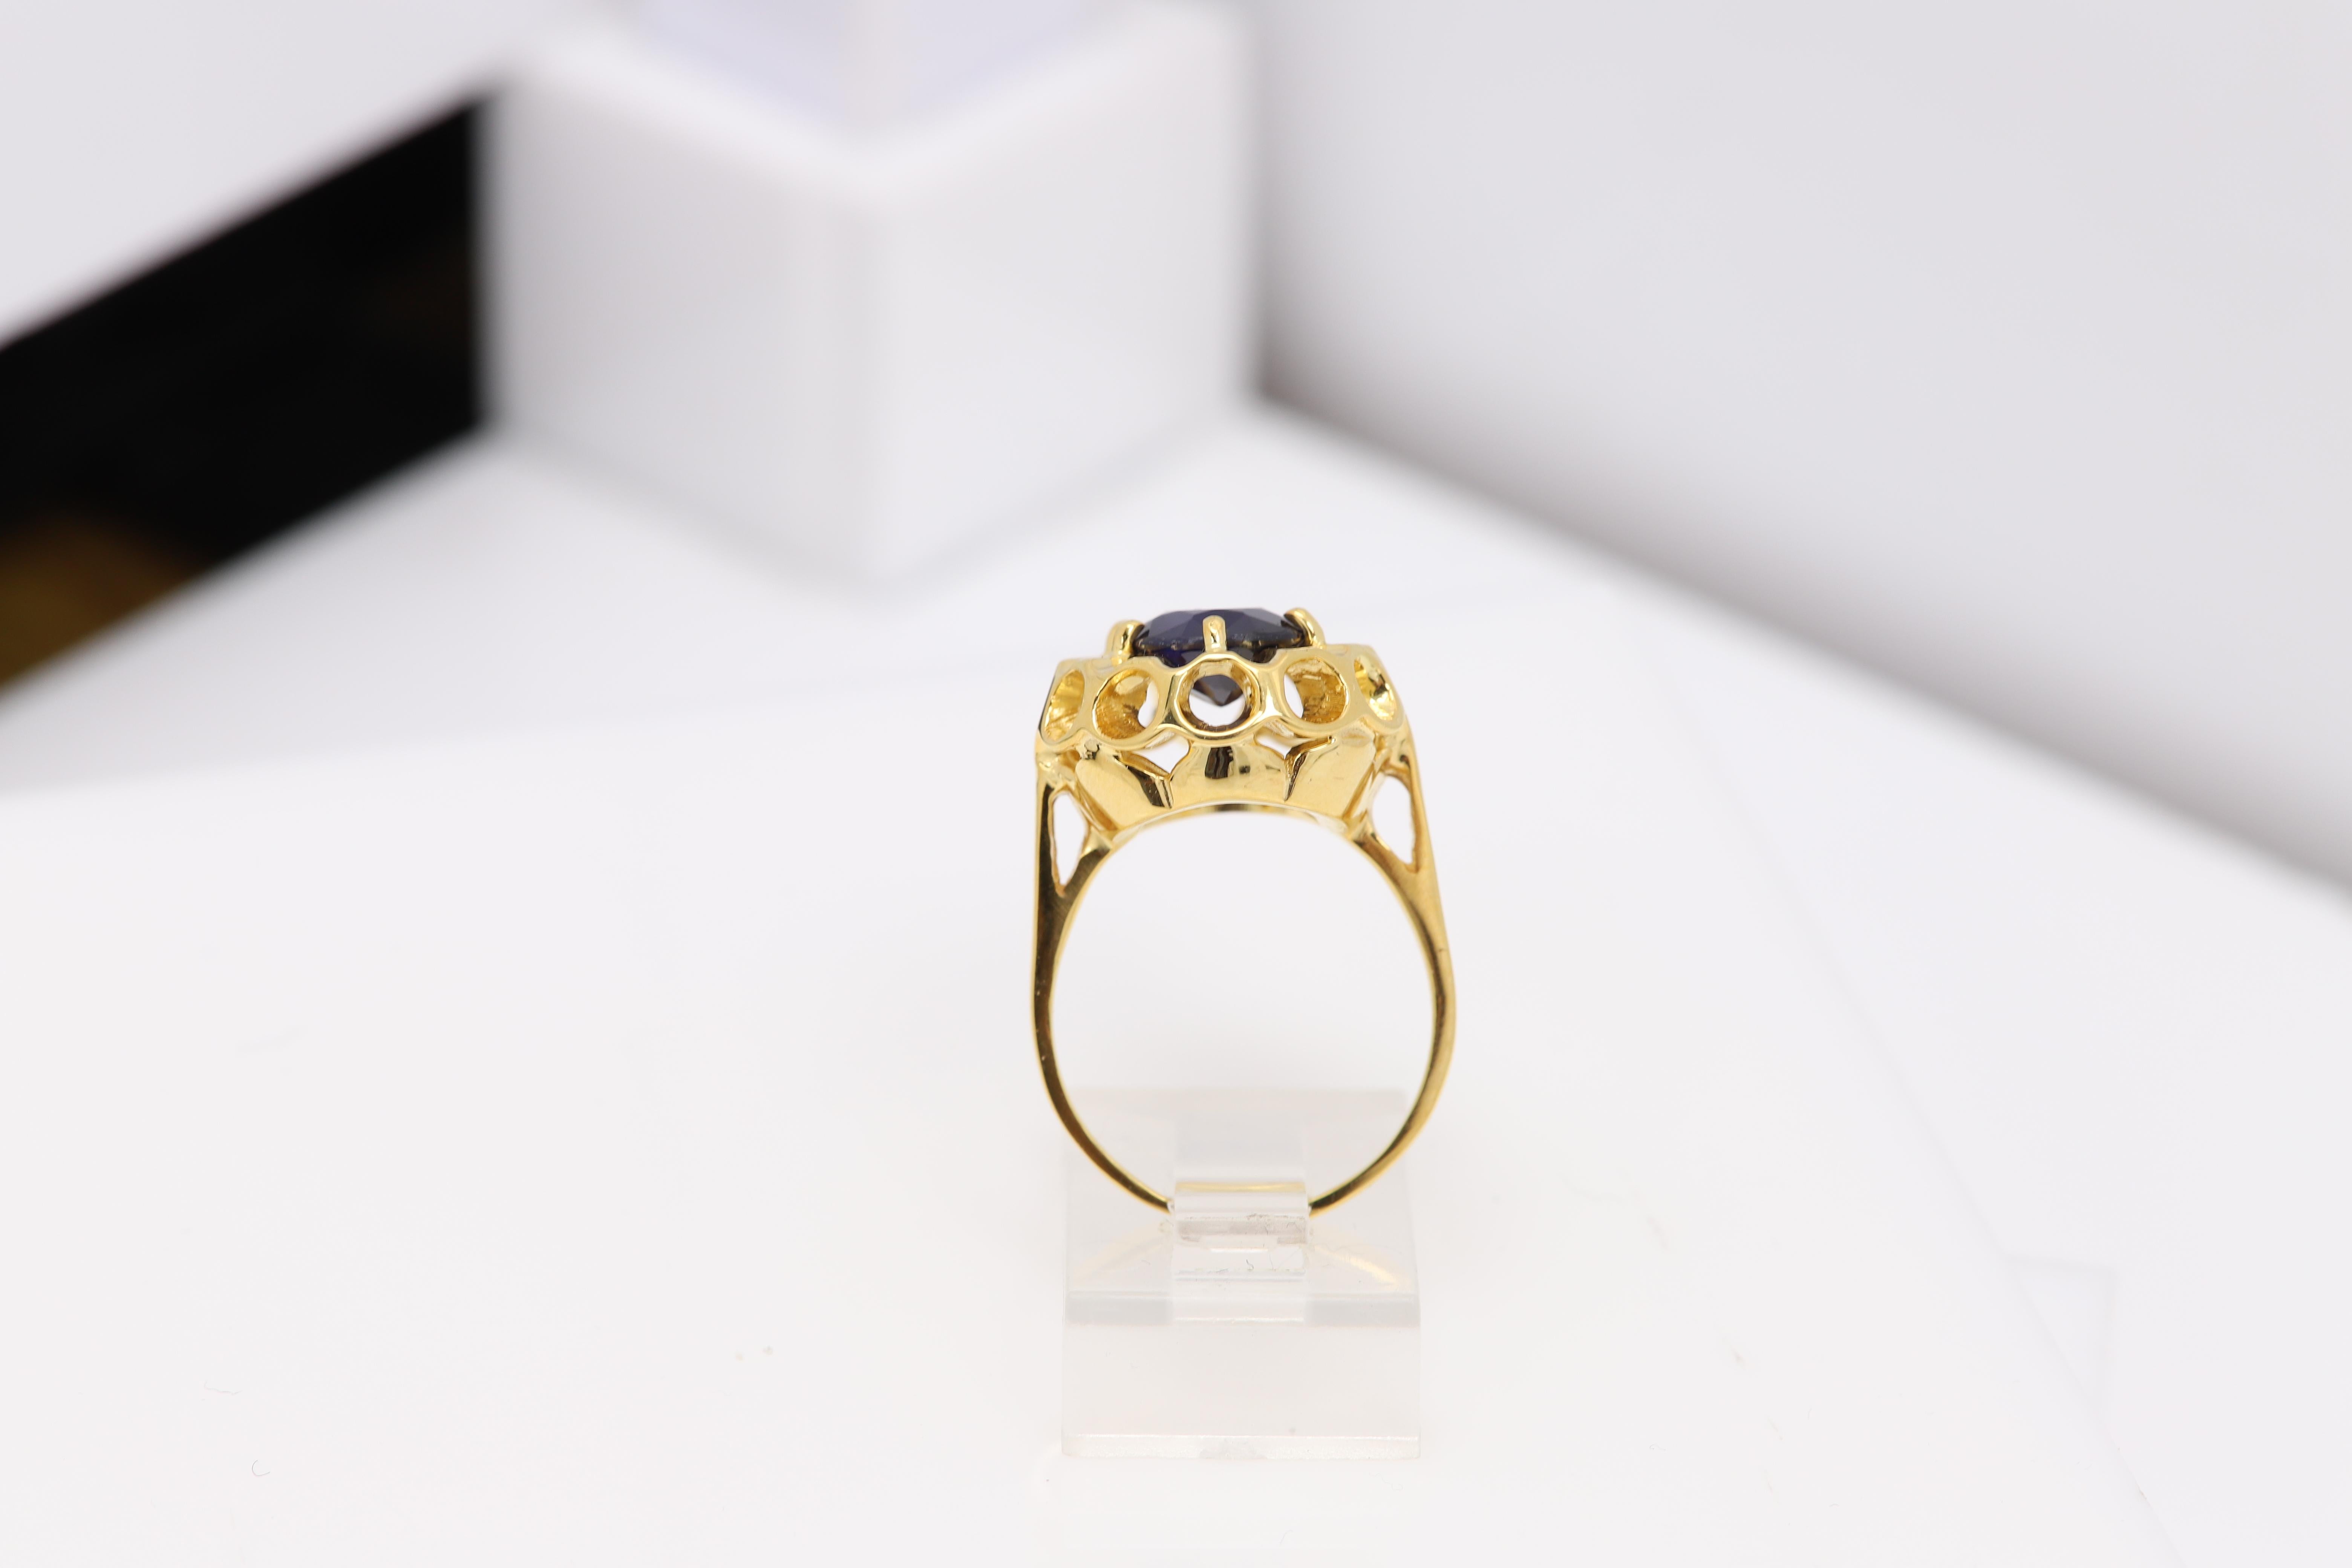 Vintage Large Oval Sapphire Ring 14 Karat Yellow Gold Circa 1940's For Sale 2